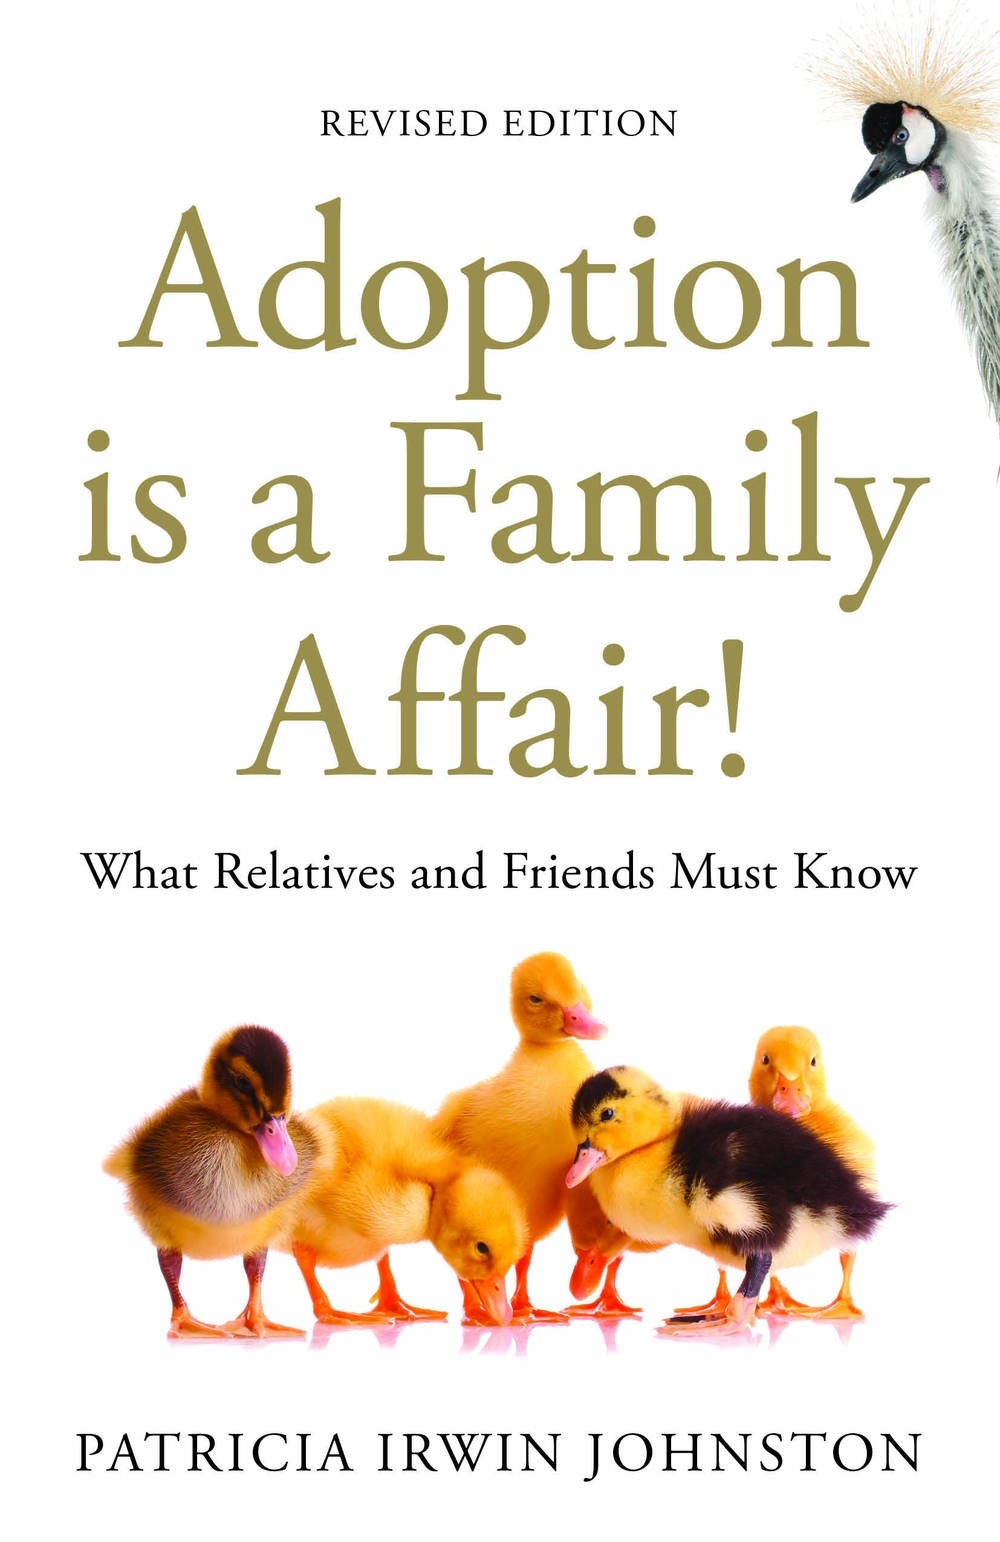 Adoption Is a Family Affair! by Patricia Irwin Johnston